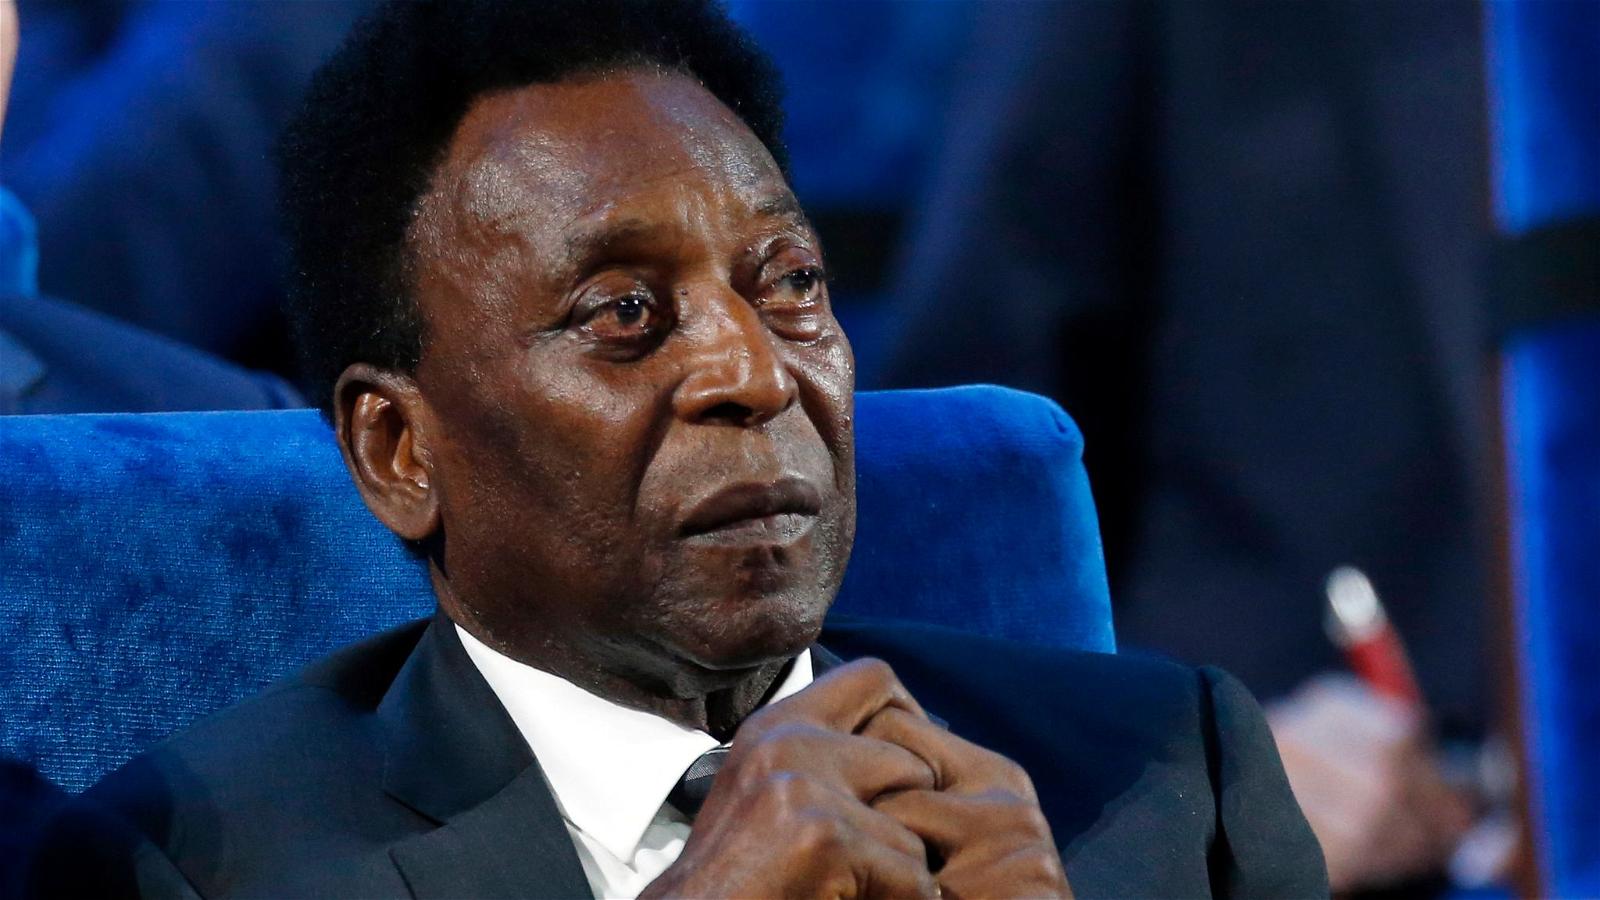 Video of frail Pele with family members goes viral